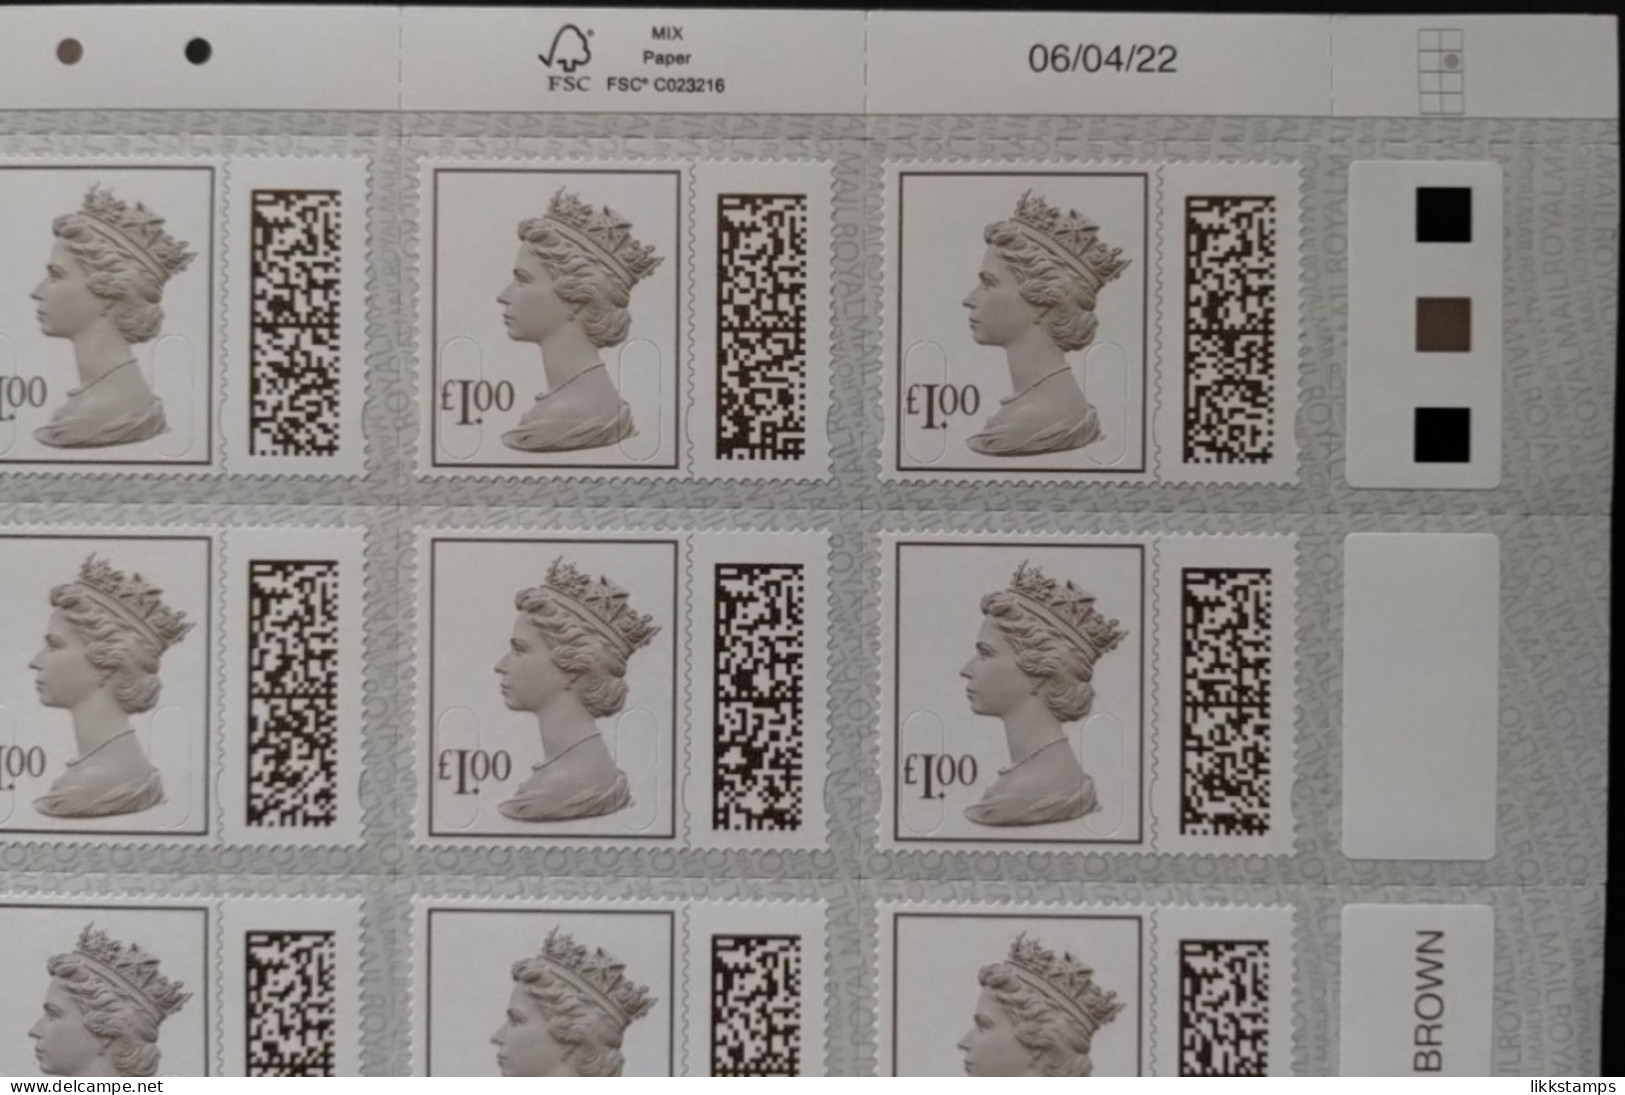 S.G. V4780 ~ 06/04/2022 ~ FULL COUNTER SHEET OF 25 X £1.00p UNFOLDED AND NHM #02932 - Machins